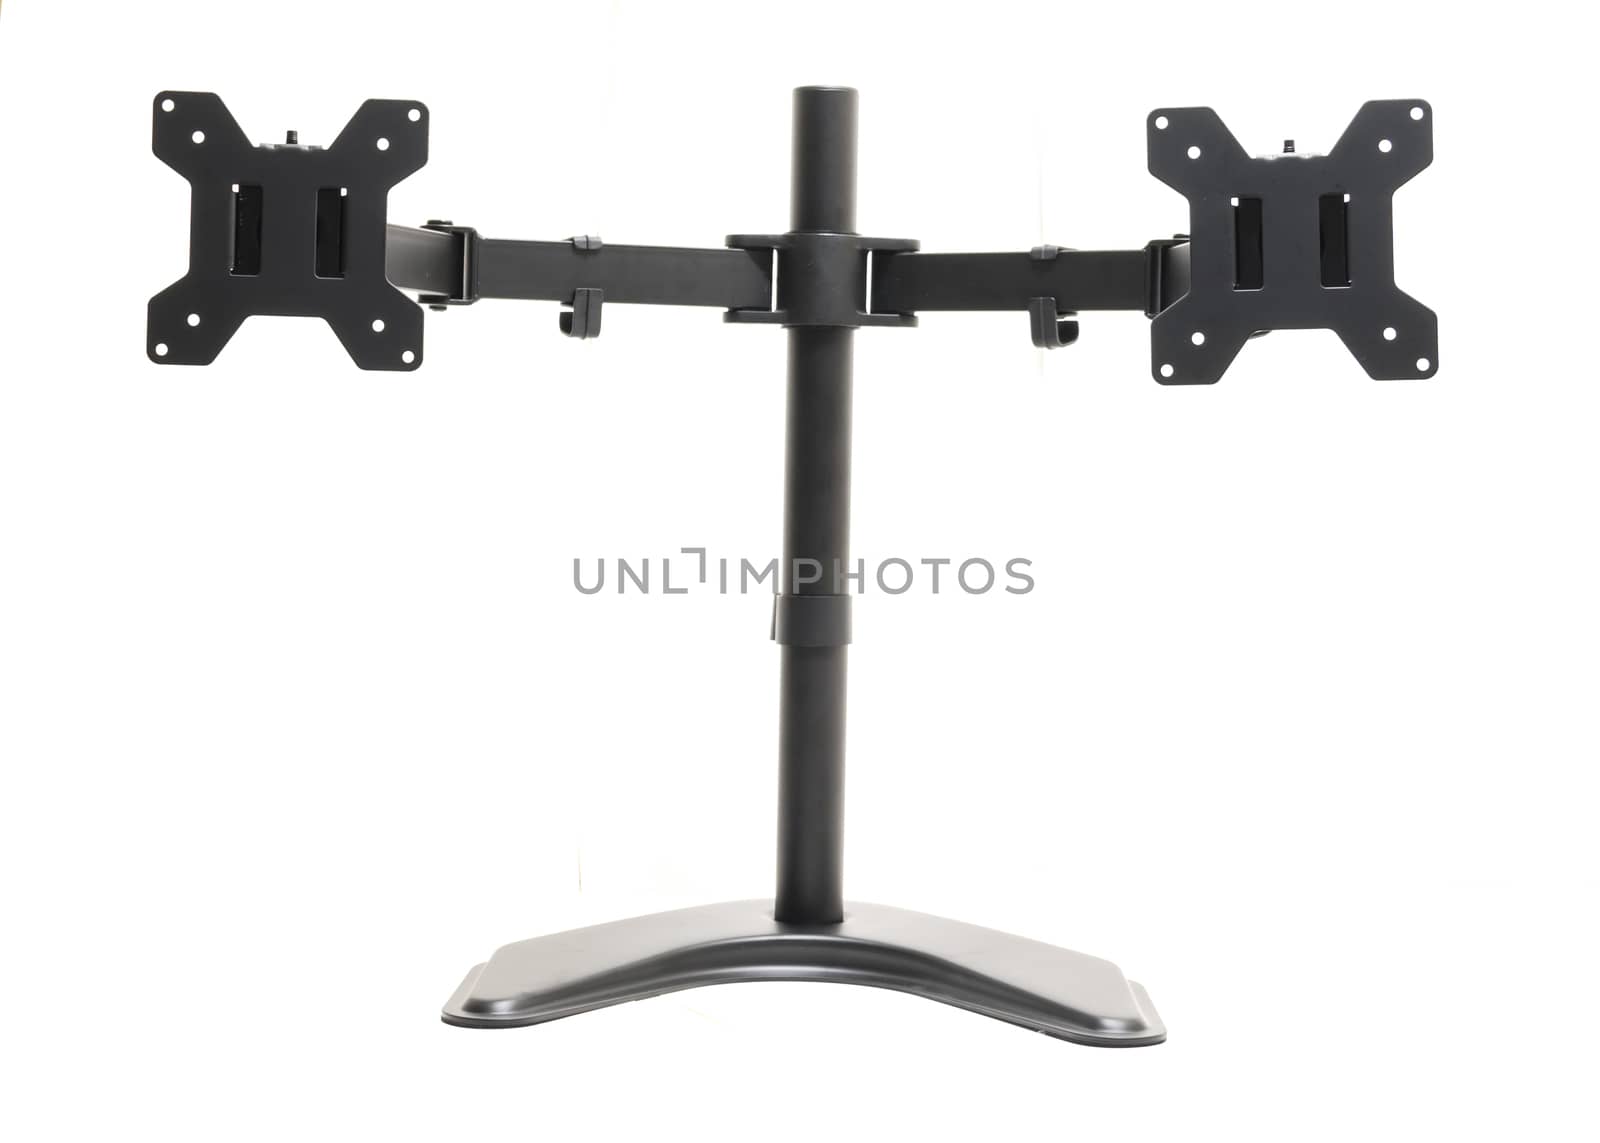 Modern dual monitor desk mount stand isolated on white background by trongnguyen